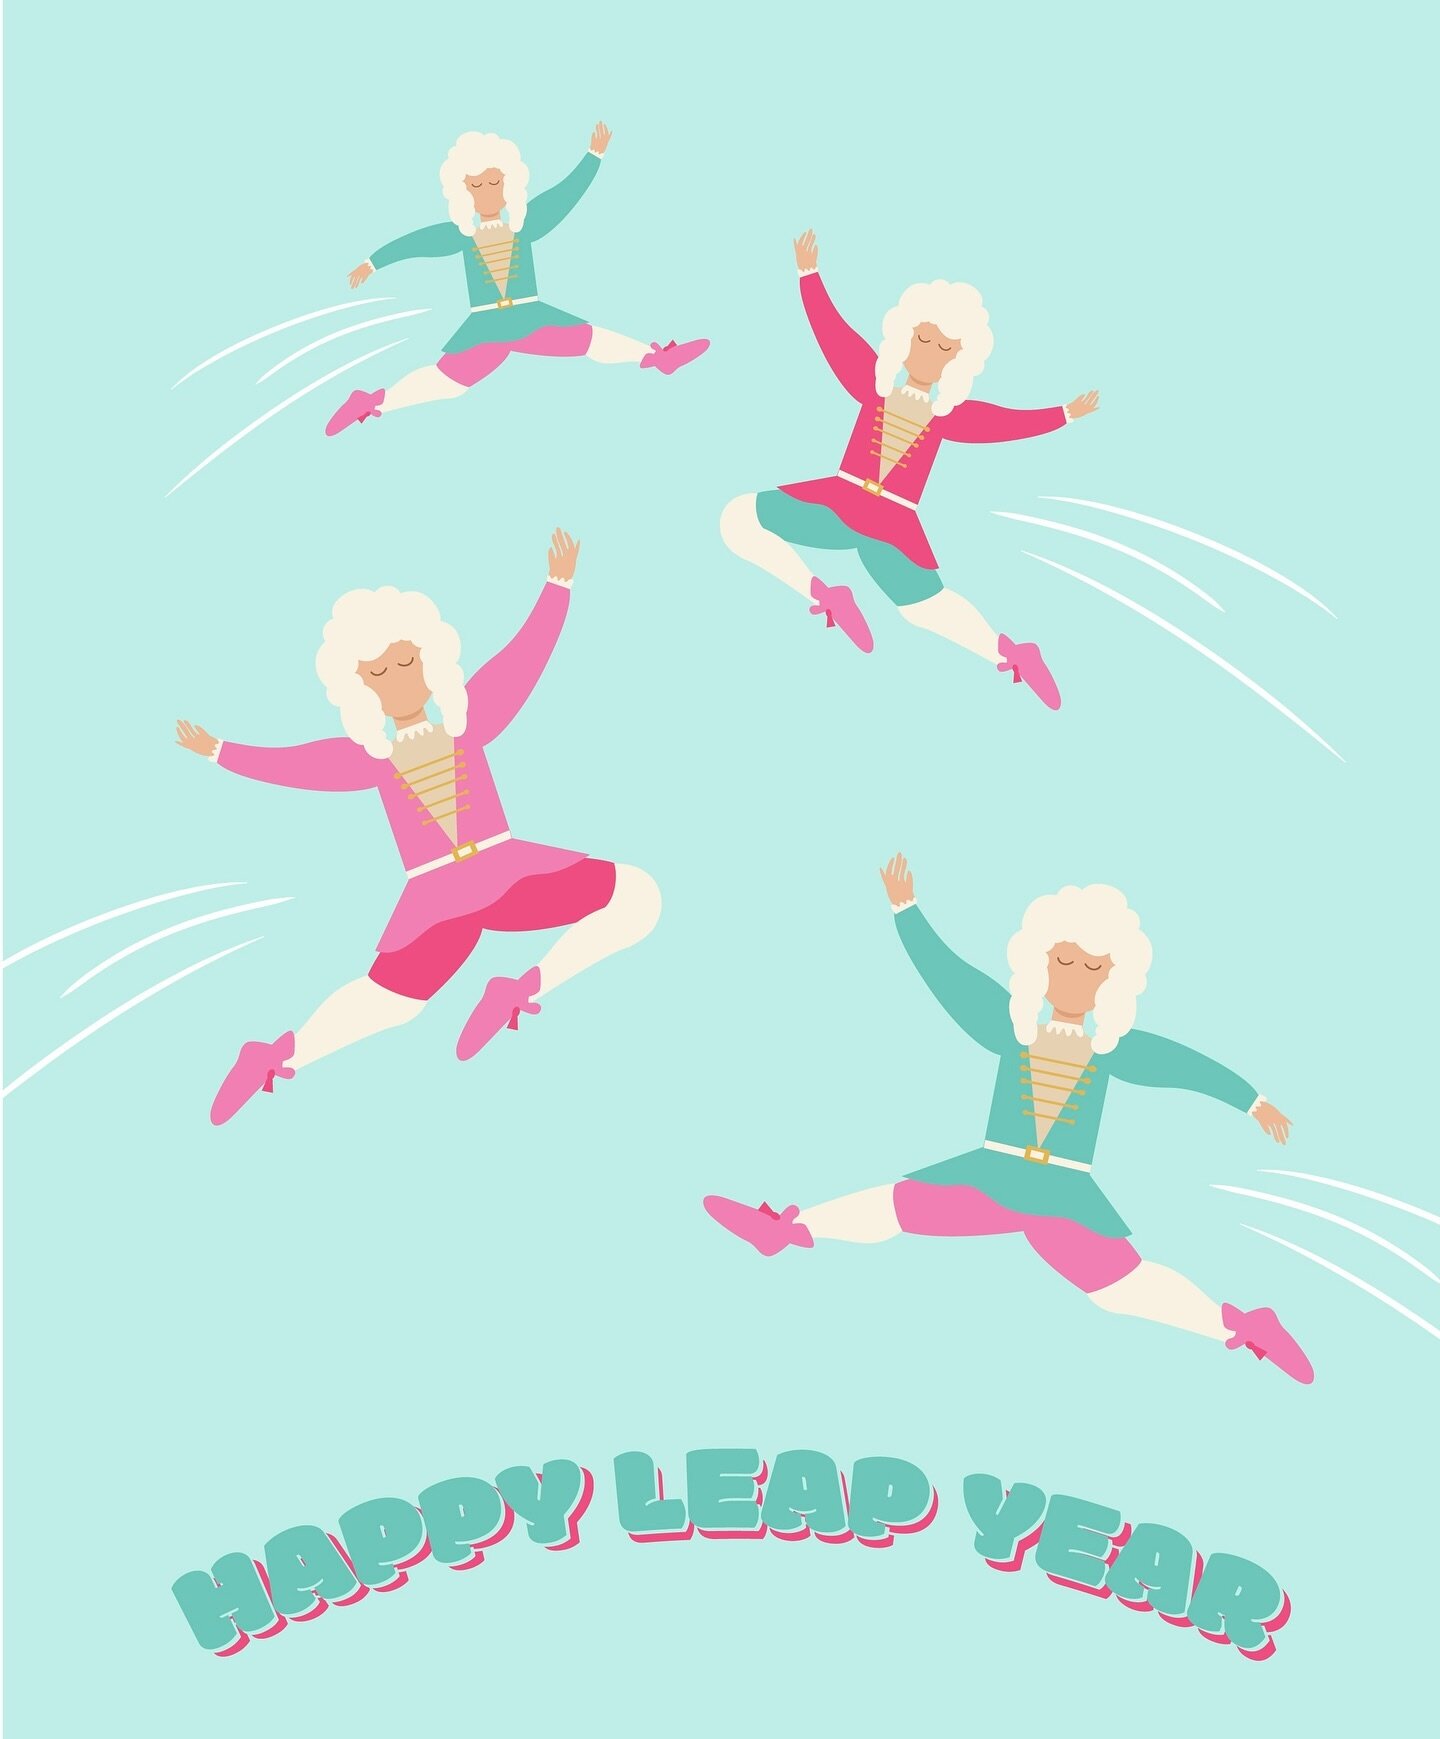 Wishing you a Happy Leap Year day. #digicouture